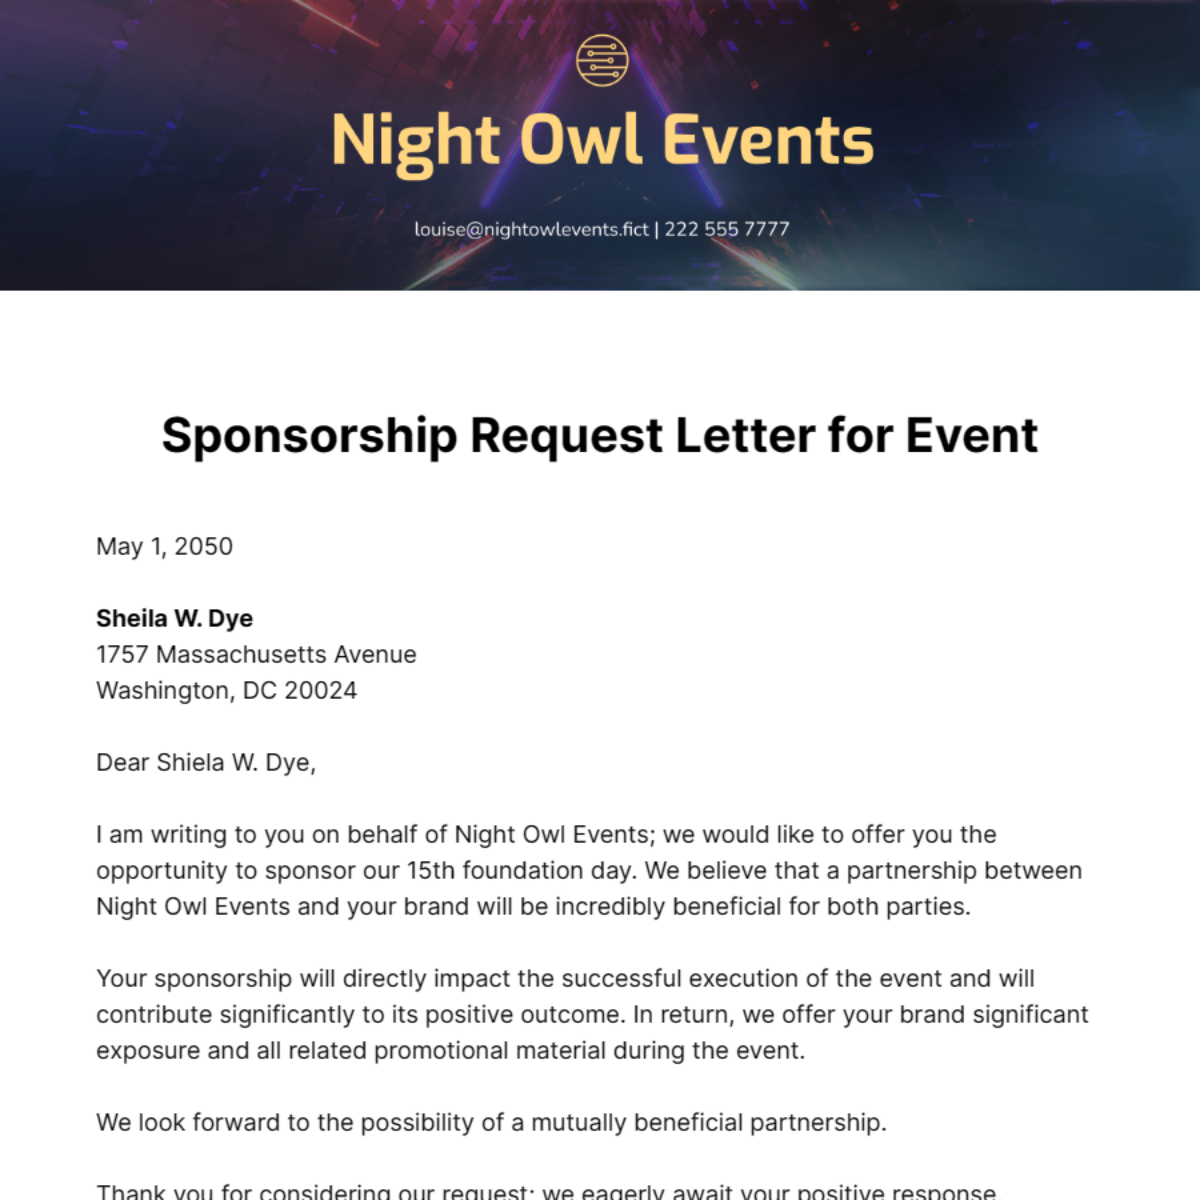 Sponsorship Request Letter for Event Template